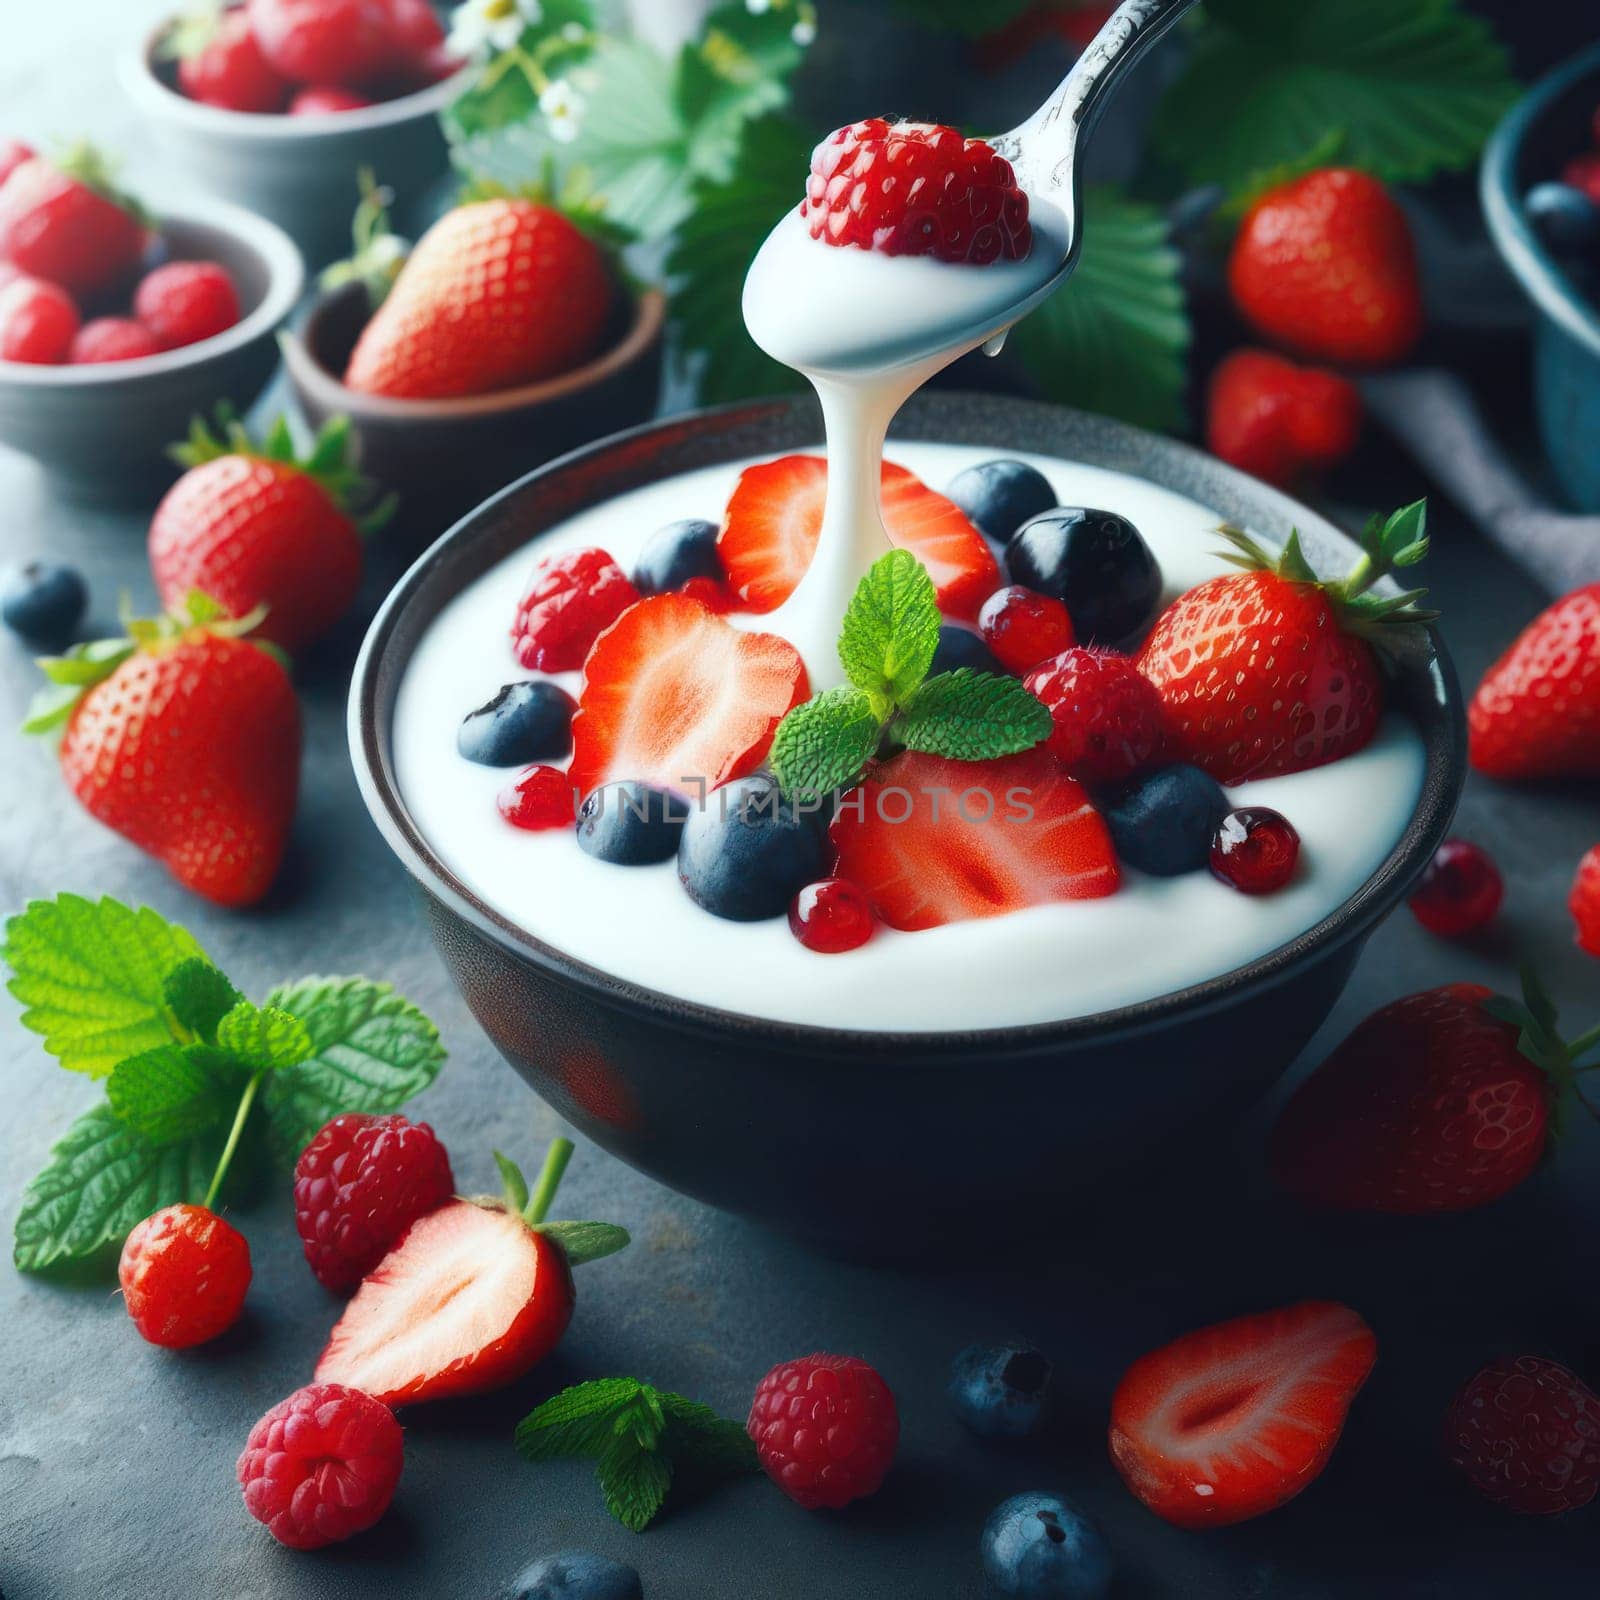 From side delicious homemade yogurt with strawberries, berries and cereals.